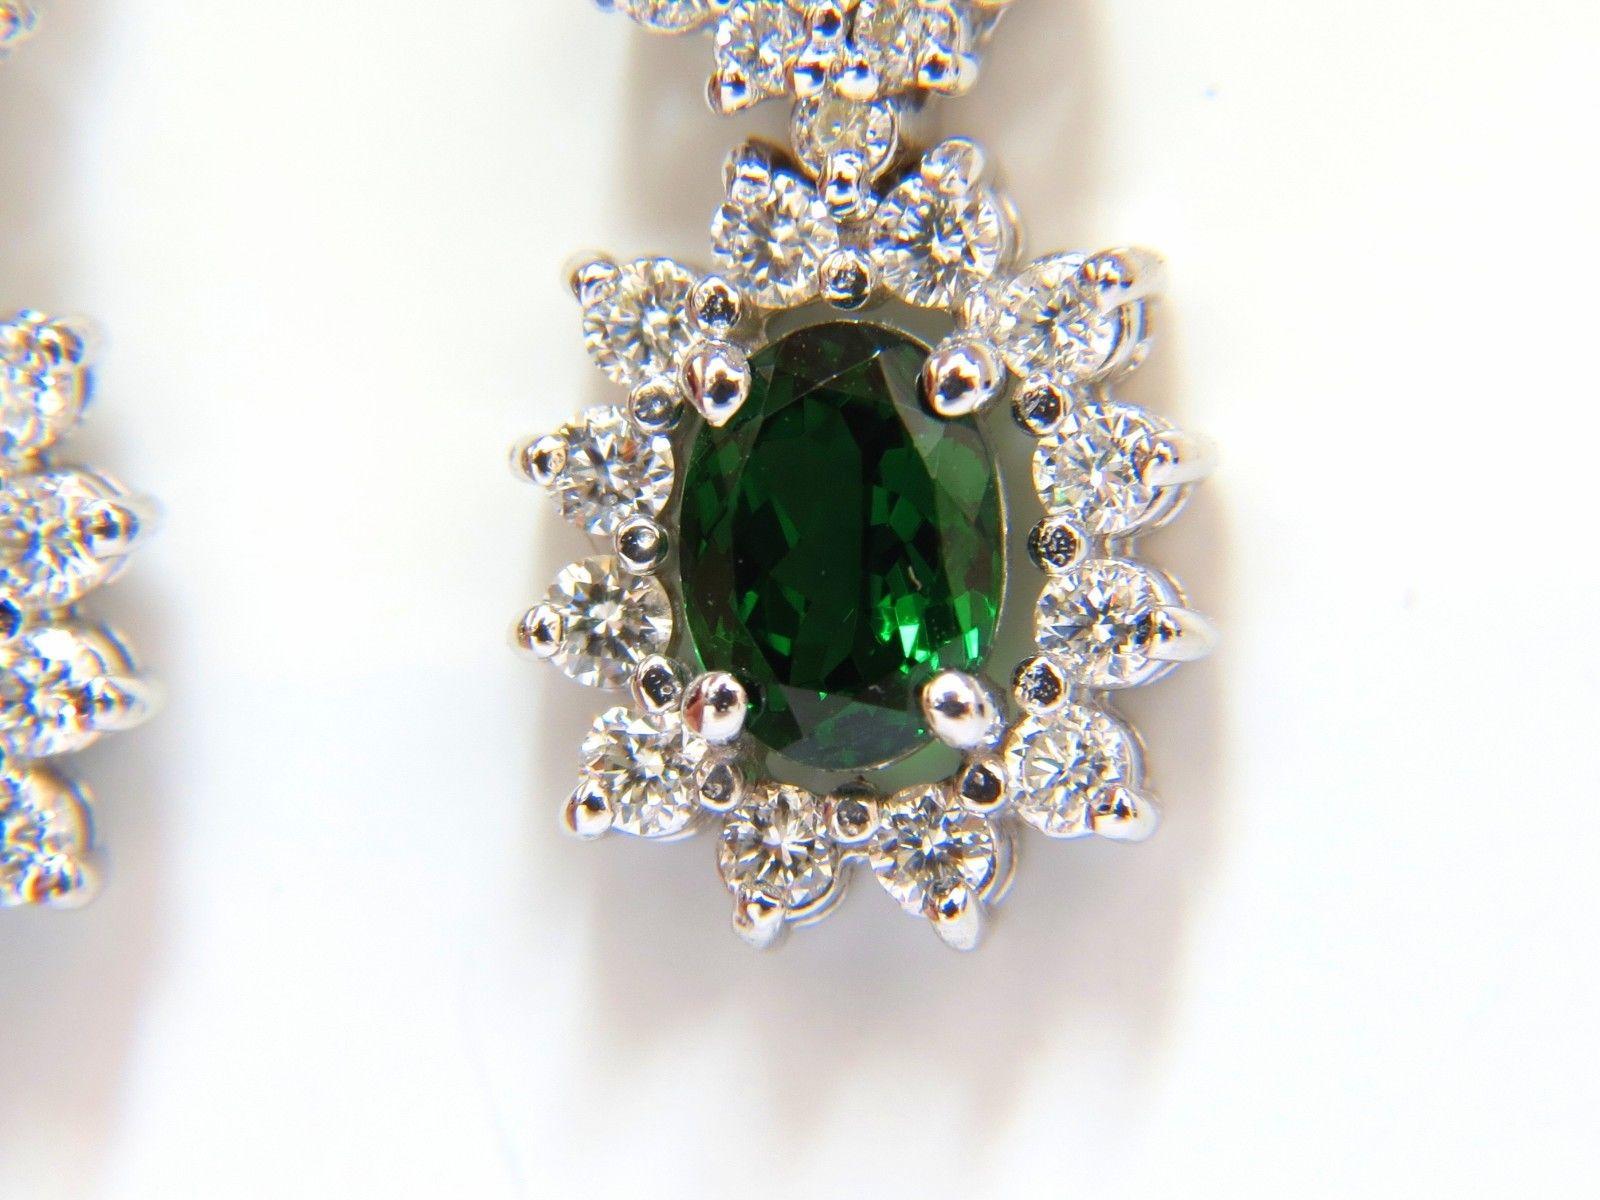 Dangling Double Halo Tsavorite & Diamond Earrings

3.32ct. Natural Vivid Green Tsavorites

6.8 X 5.2mm (larger)

6.8 X 4.8mm (upper / smaller)

Full cut oval brilliants.

Excellent, clean clarity & transparent 



2.00ct. round, full cut